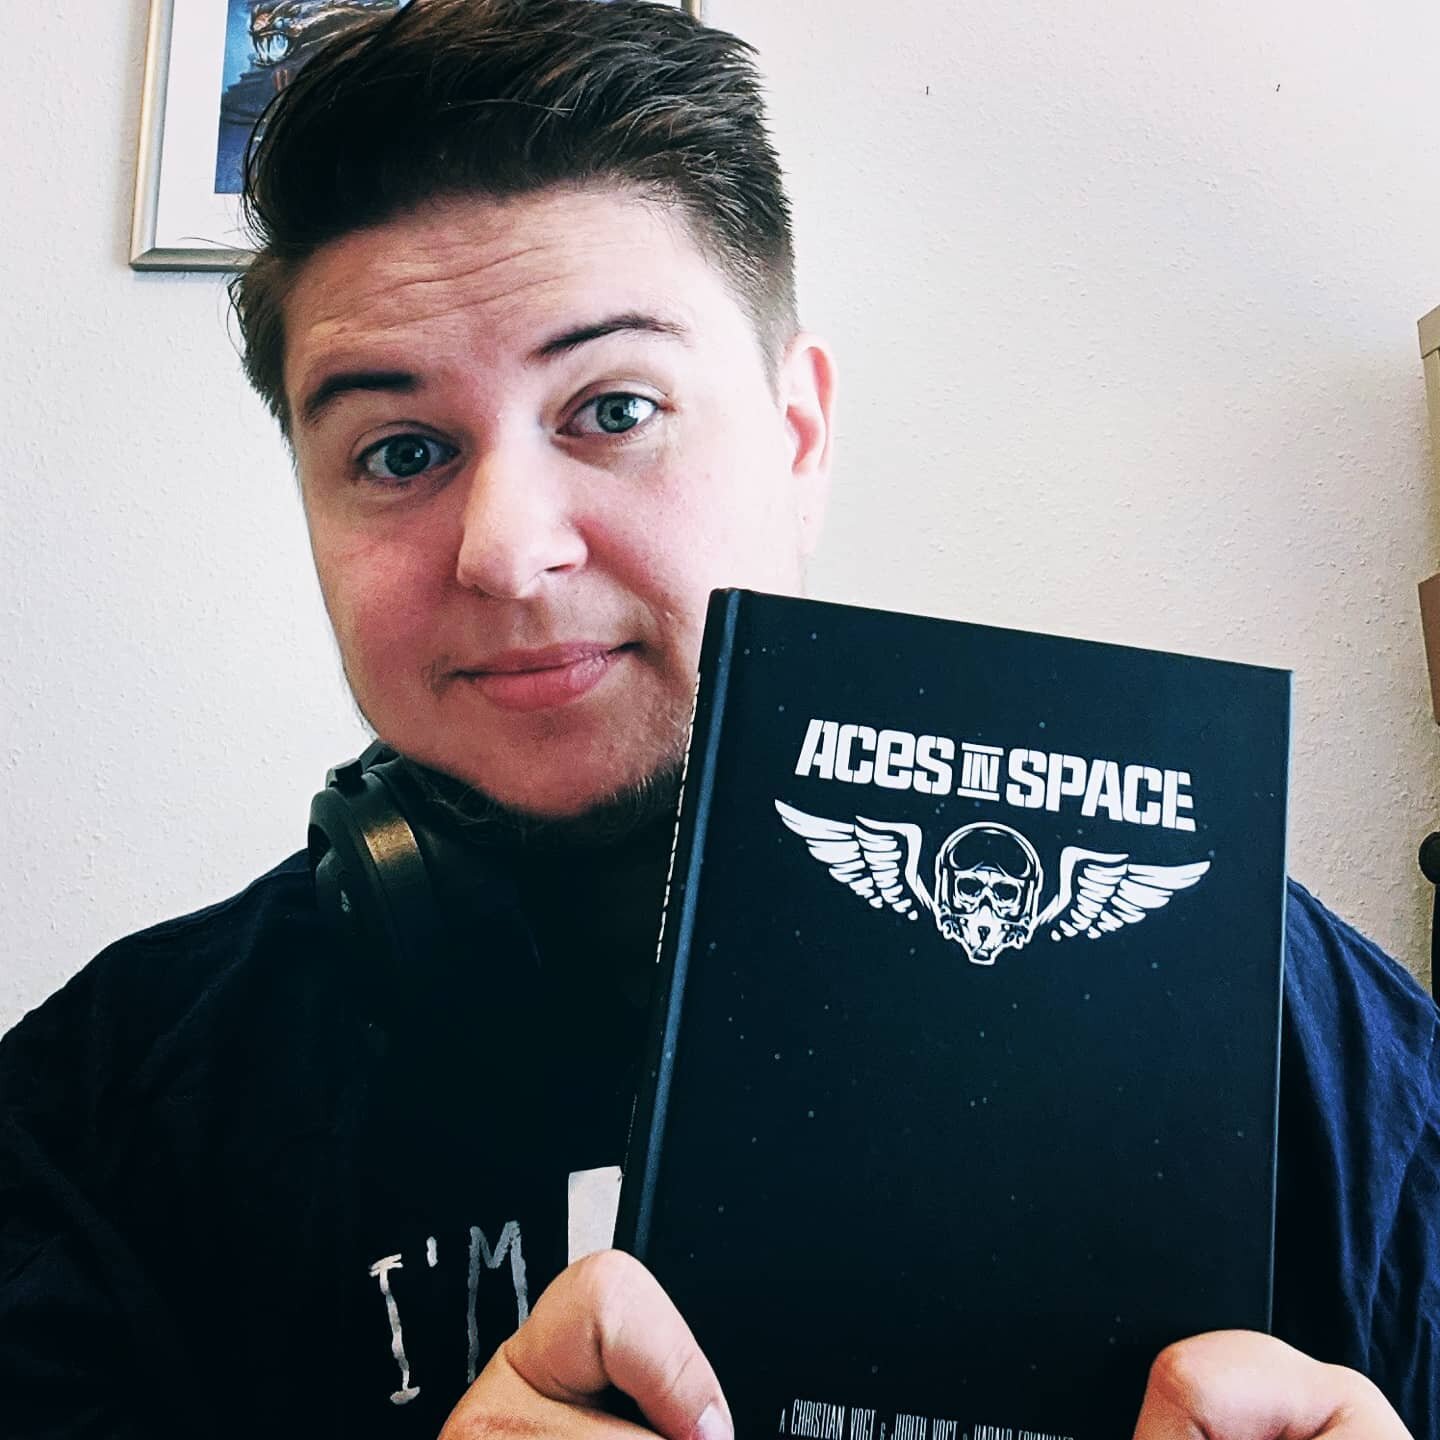 Aces in Space - a fate setting with lots of my illustrations - is out now! 

I am very proud of being part of the production. Shout out to @atalante_underwood @heckmueller and Christian Vogt - the creators of Aces in Space!

#AcesInSpace is also amaz